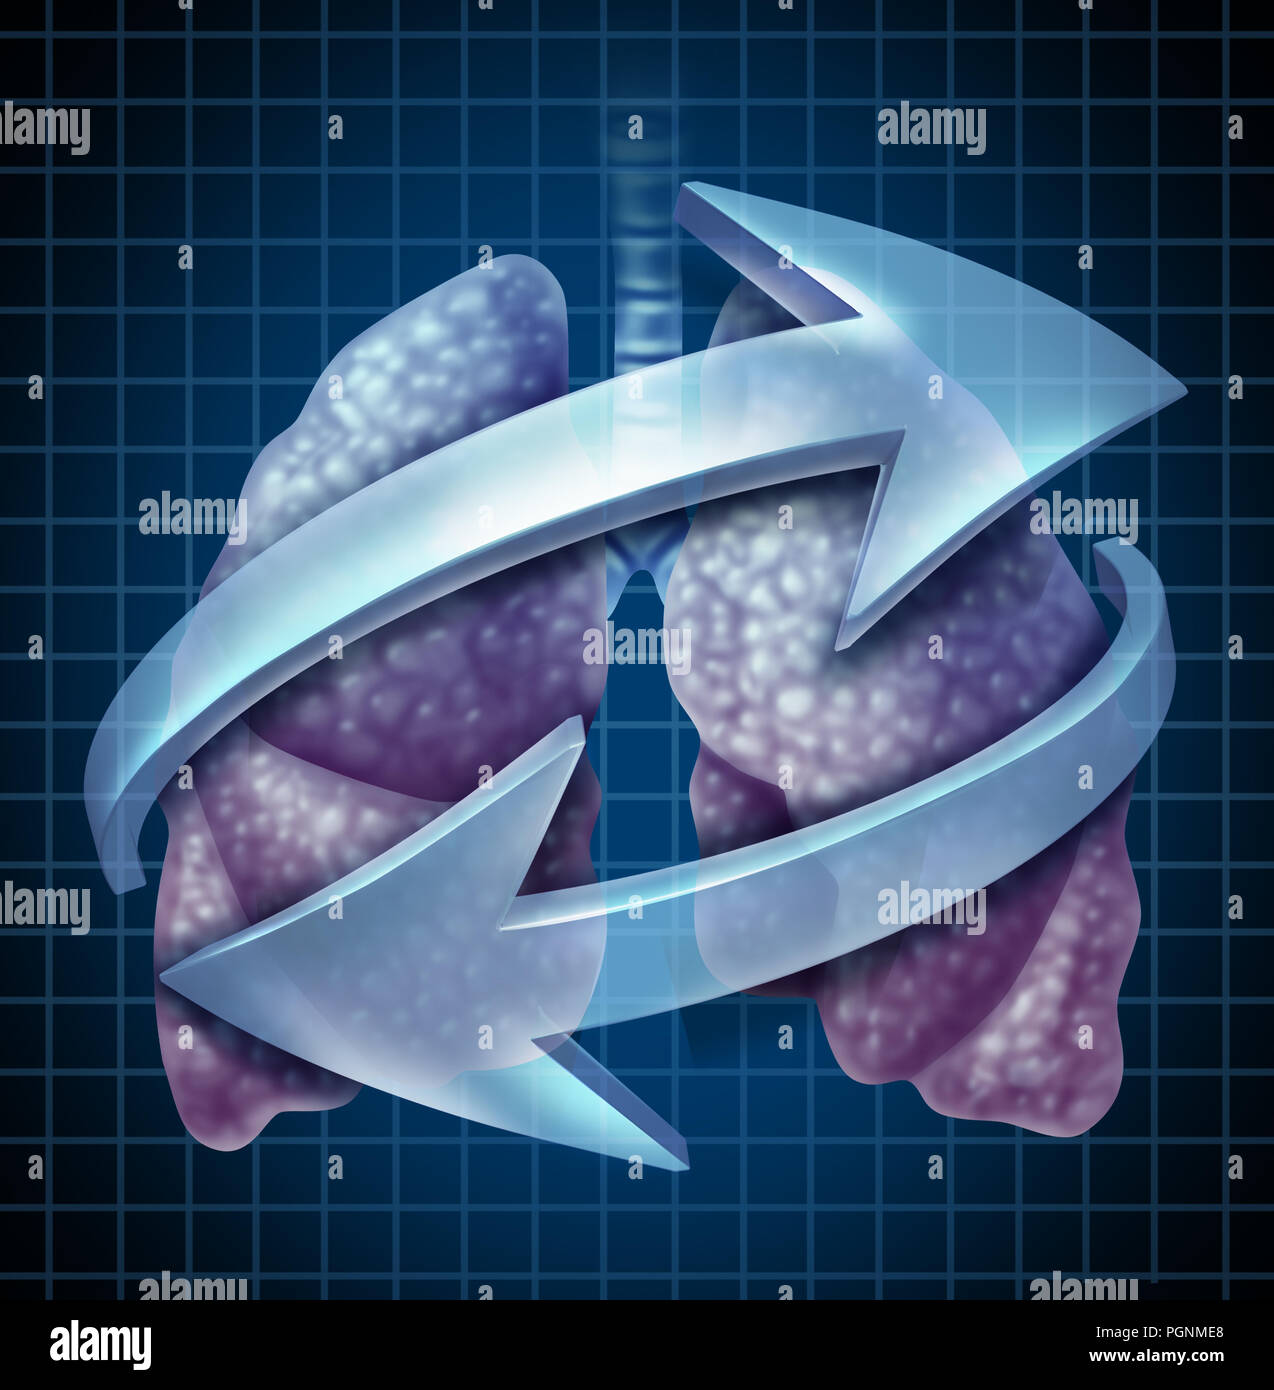 Breathing lungs human respiratory system symbol as an anatomical concept for inhaling and exhaling with 3D illustration elements. Stock Photo